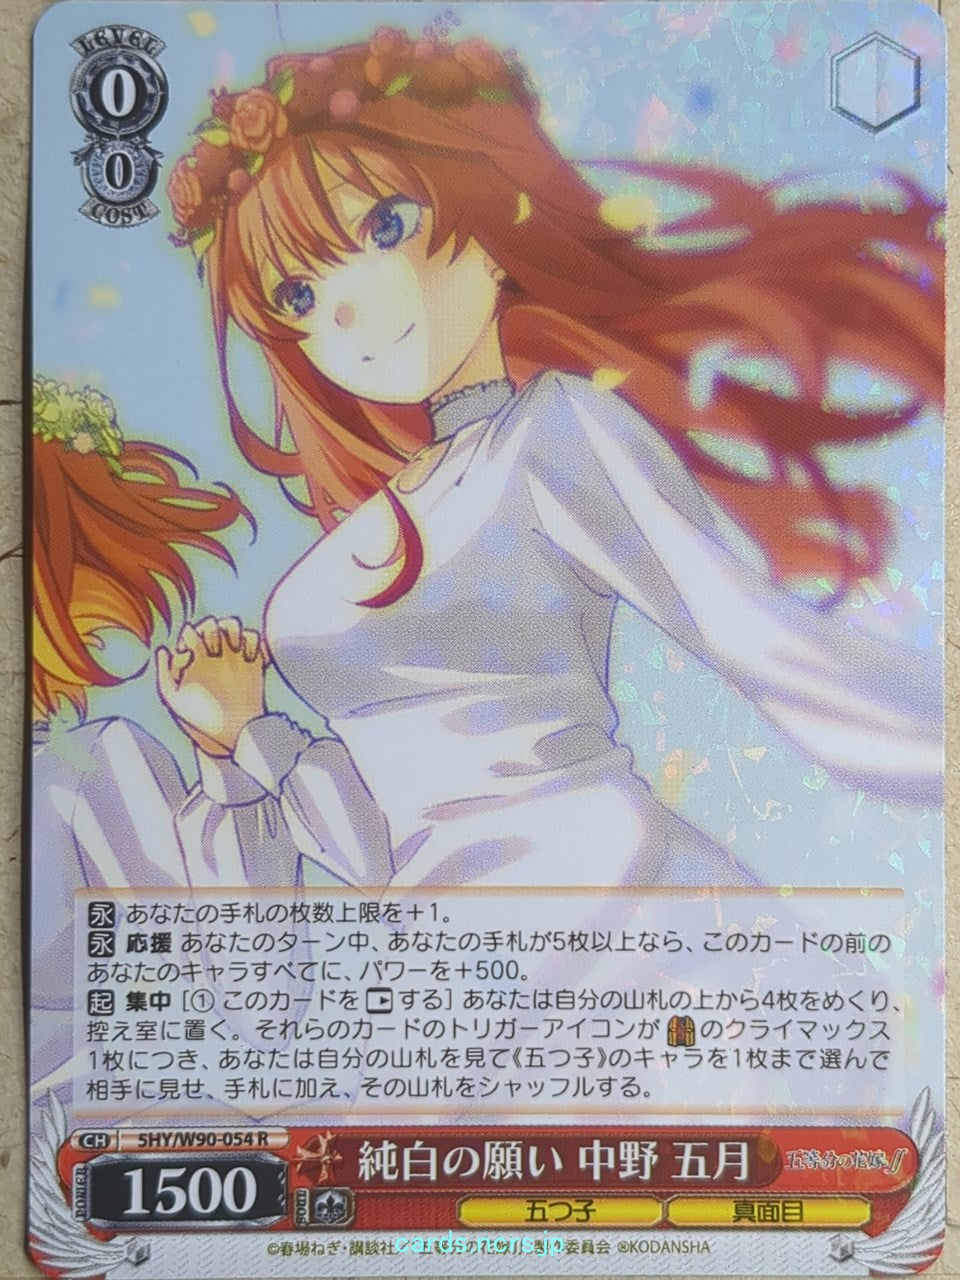 Weiss Schwarz The Quintessential Quintuplets -Itsuki Nakano-   Trading Card 5HY/W90-054R